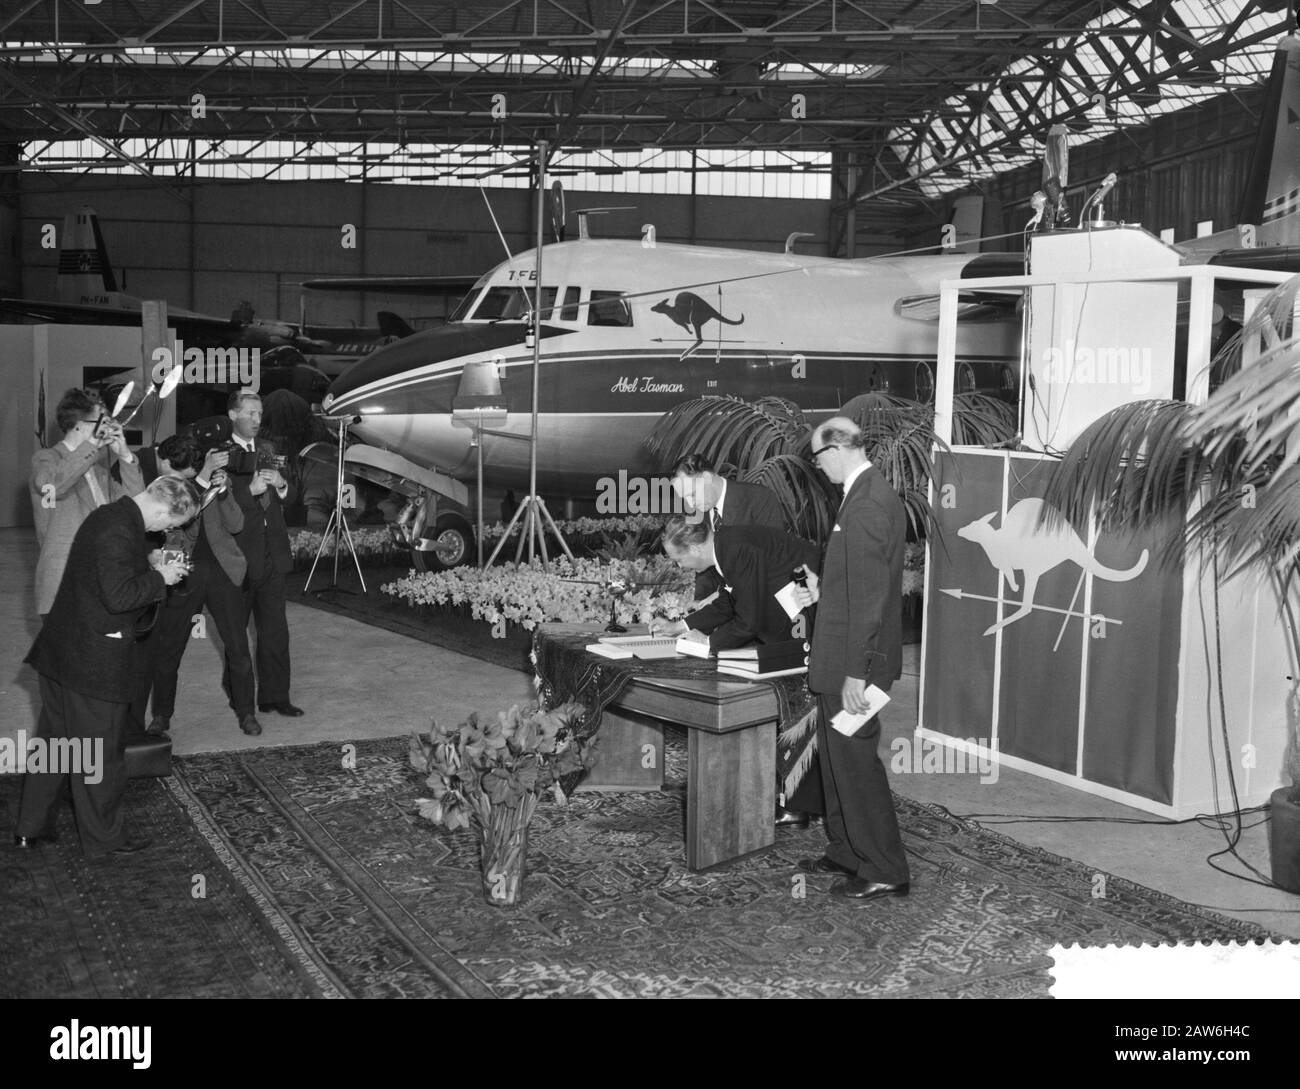 Transfer Friendship on the Trans Australian Airlines in the Fokker factories in Amsterdam, the transfer ceremony Date: April 6, 1959 Stock Photo